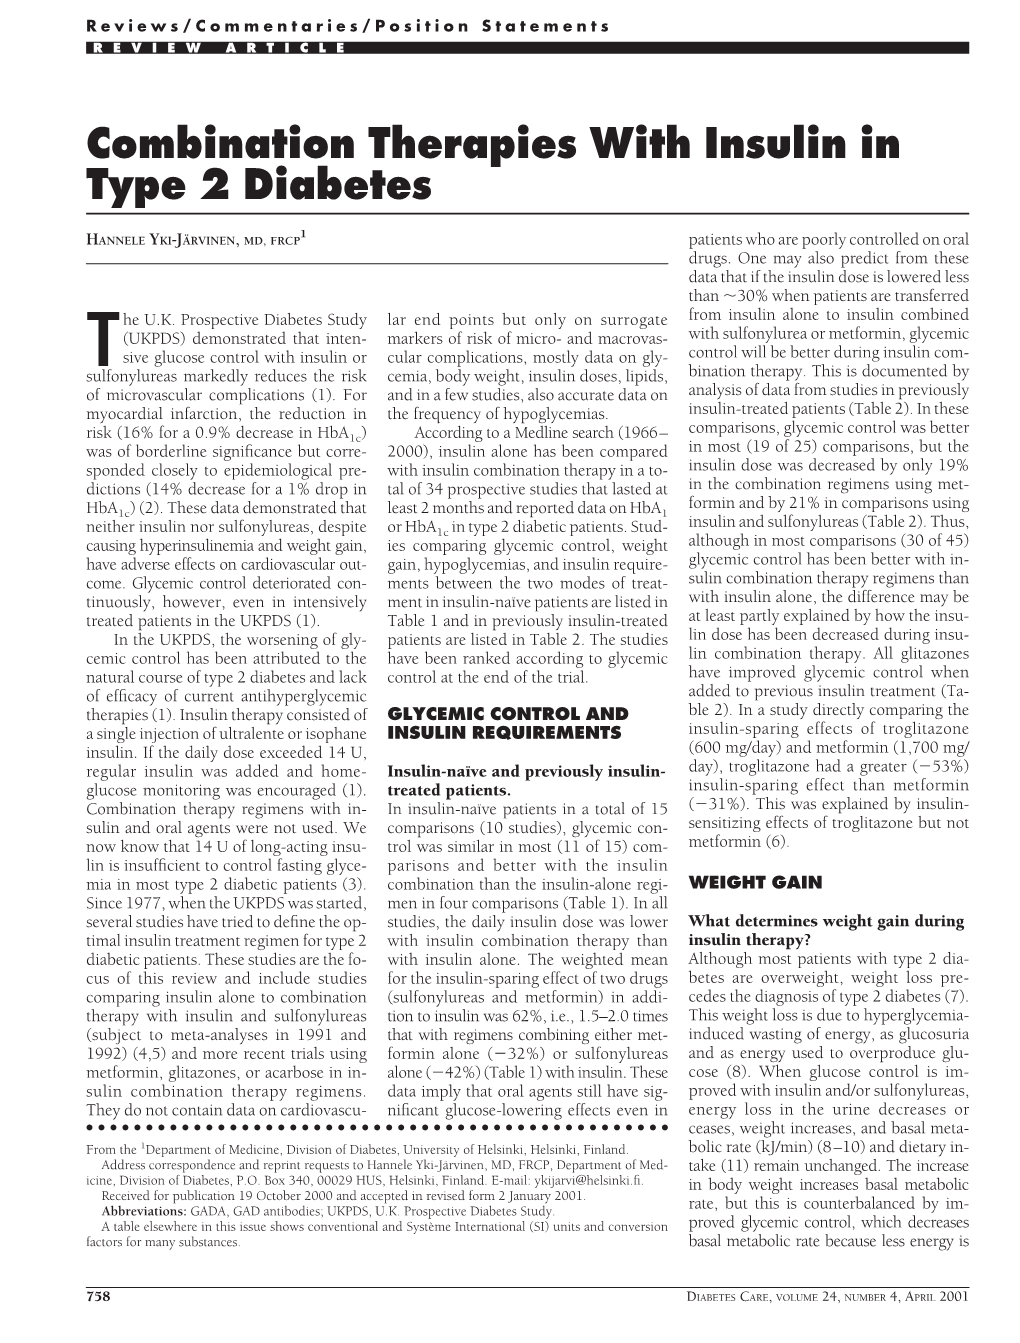 Combination Therapies with Insulin in Type 2 Diabetes